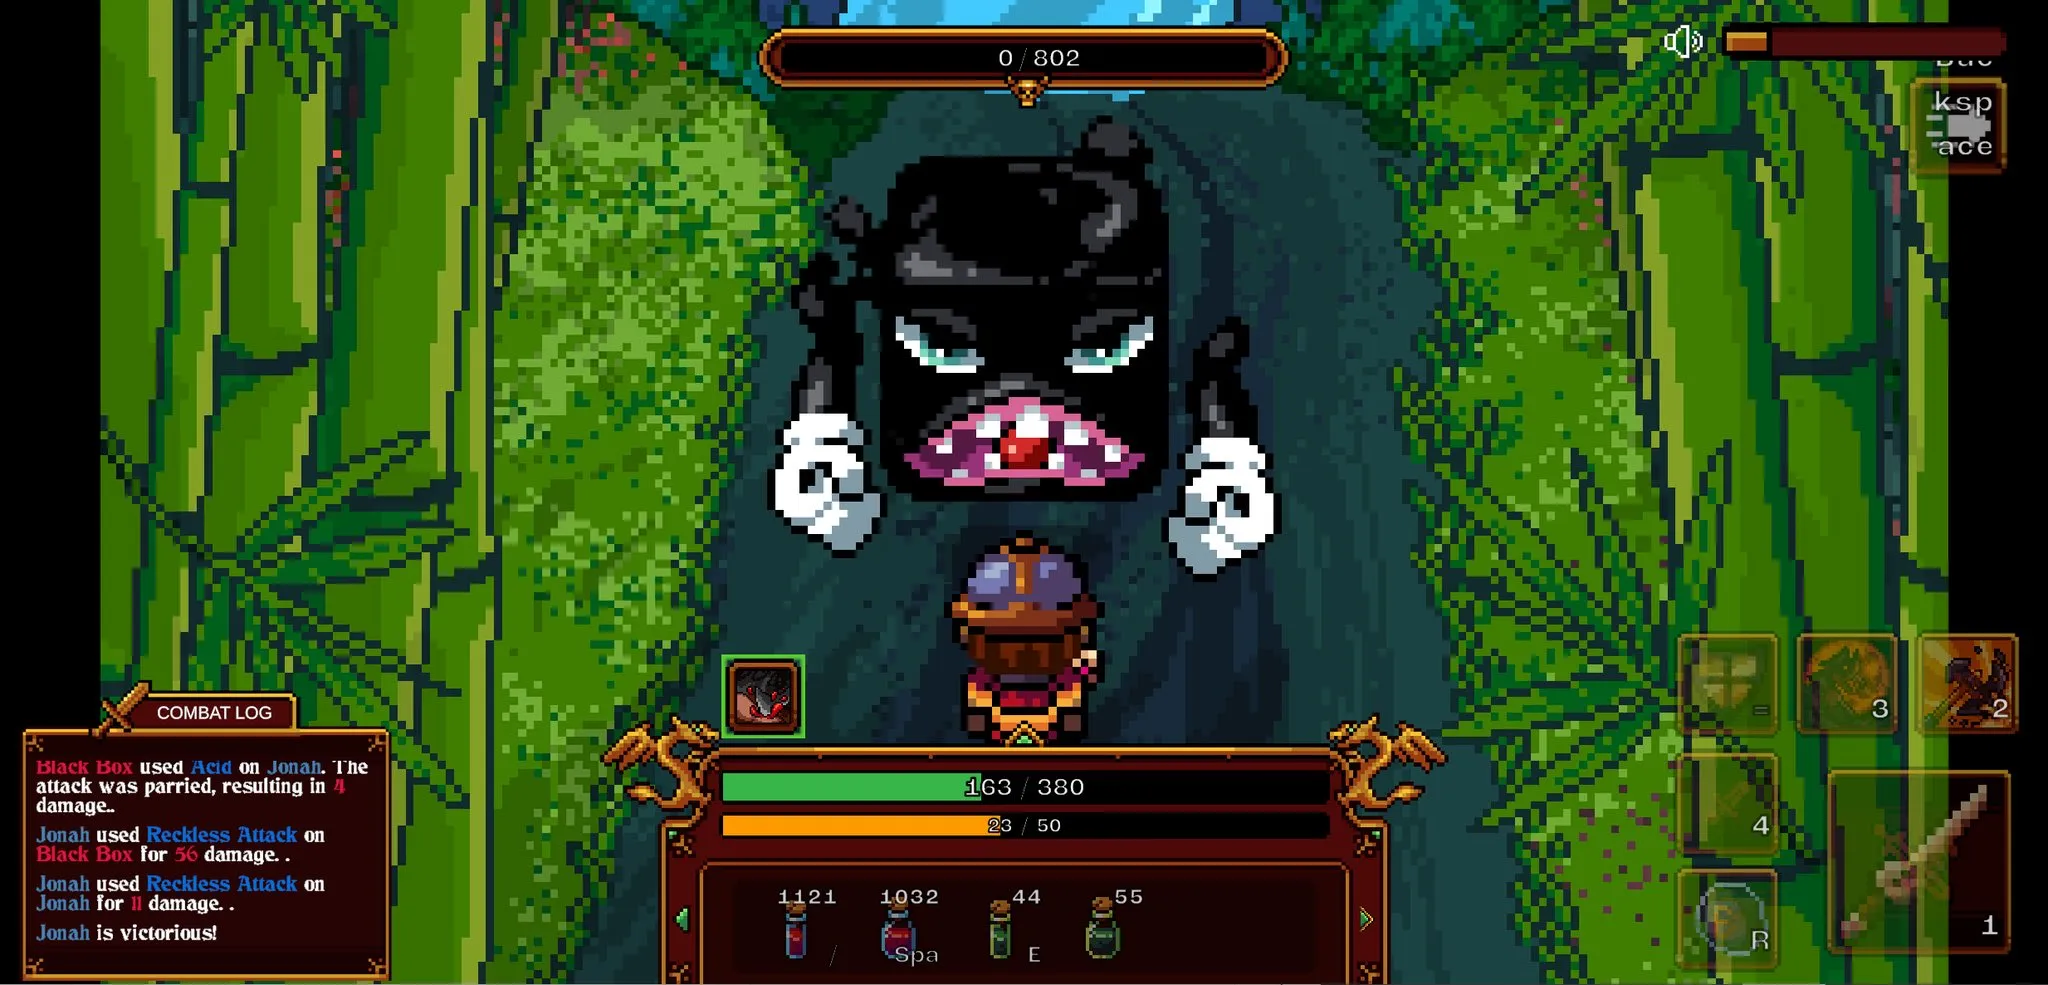 The Crypto Raiders screenshot depicts a character engaging in battle with Black Box, a monstrous dungeon boss who is fiercely determined to attack.